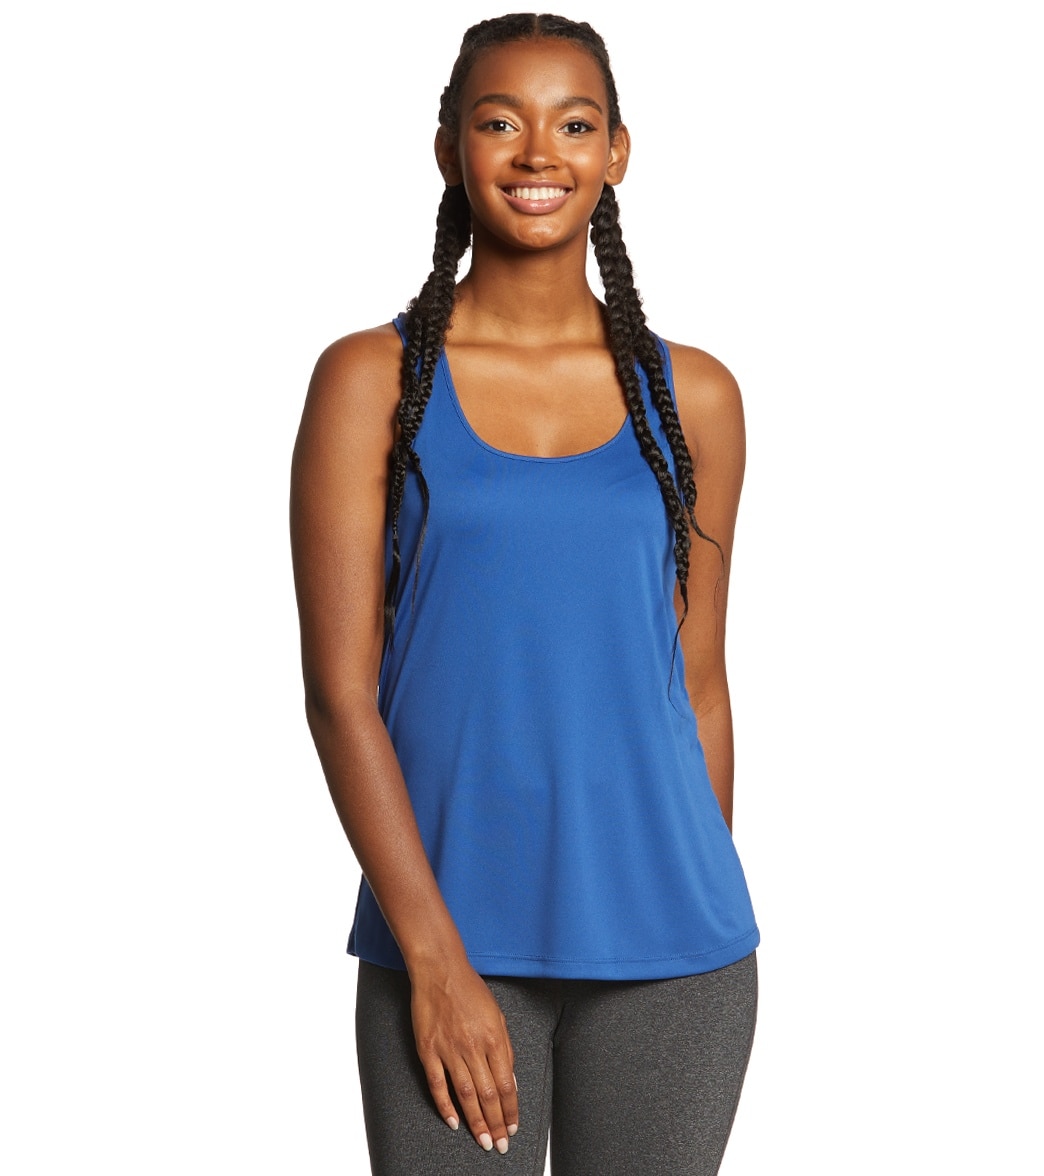 Women's Posicharge Competitortm Racerback Tank Top - Royal Small Polyester - Swimoutlet.com